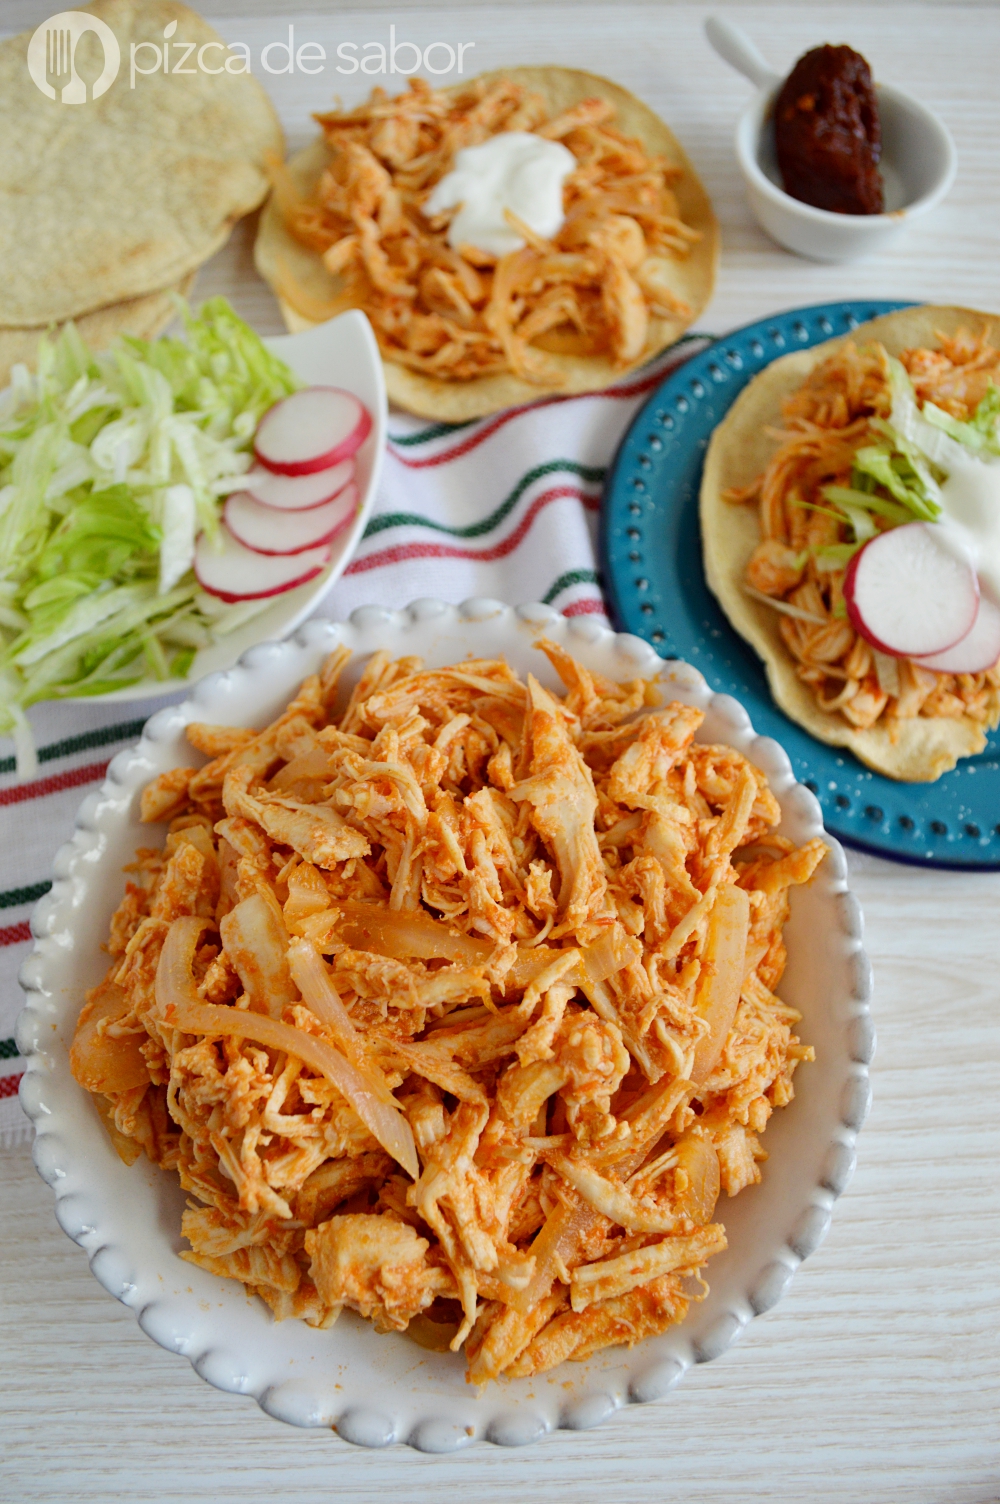 Chicken tinga or chicken in chipotle sauce www.thebestmexicanrecipes.com